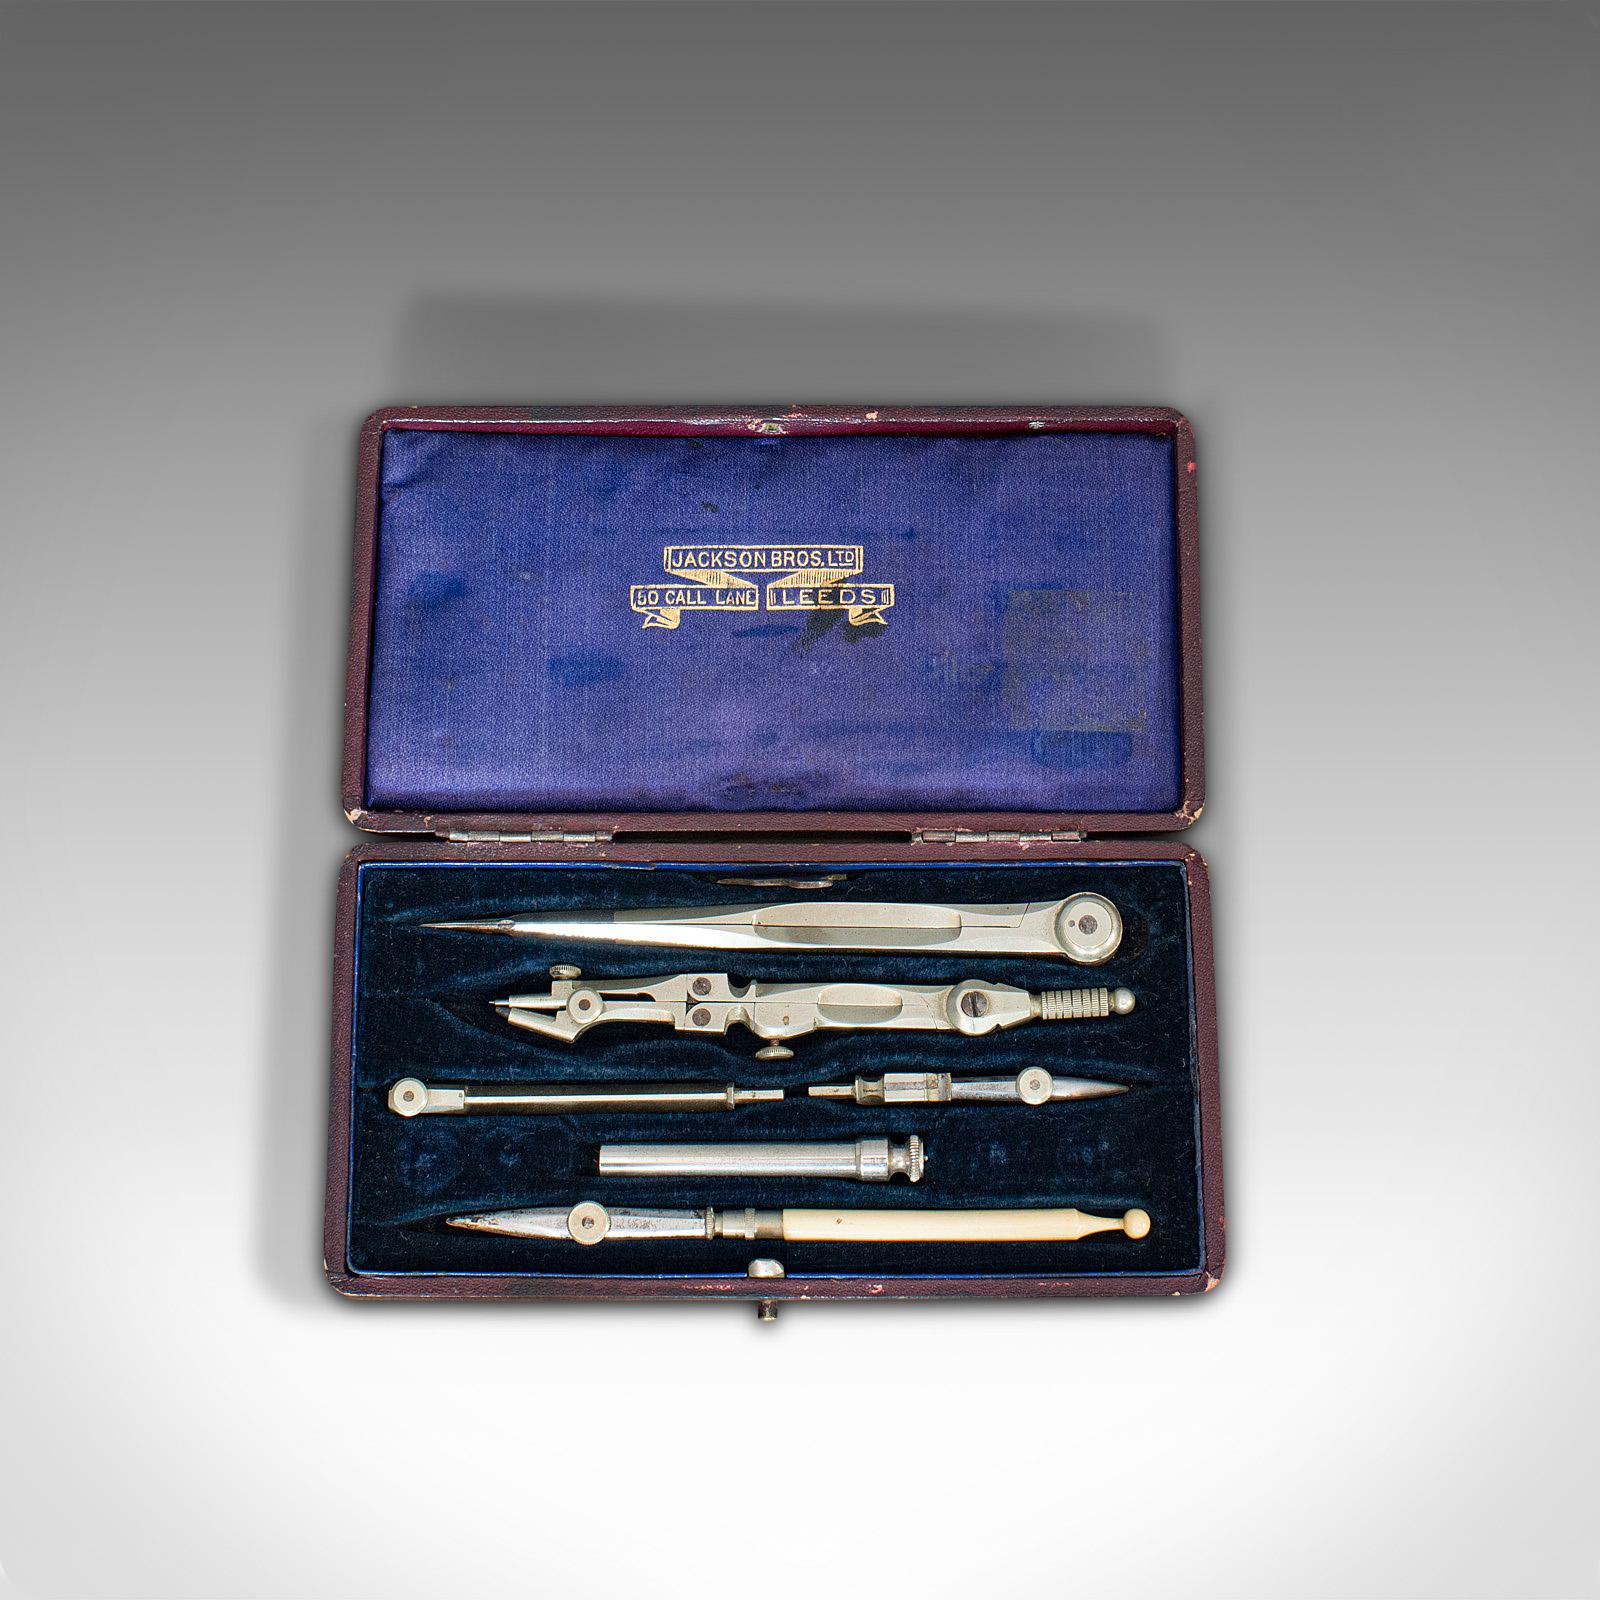 This is an antique draughtsman's set. An English, silver nickel drawing instrument or tool set by Jackson Bros of Leeds, dating to the late Victorian period, circa 1900.

An appealing set of instruments from the north of England
Displaying a